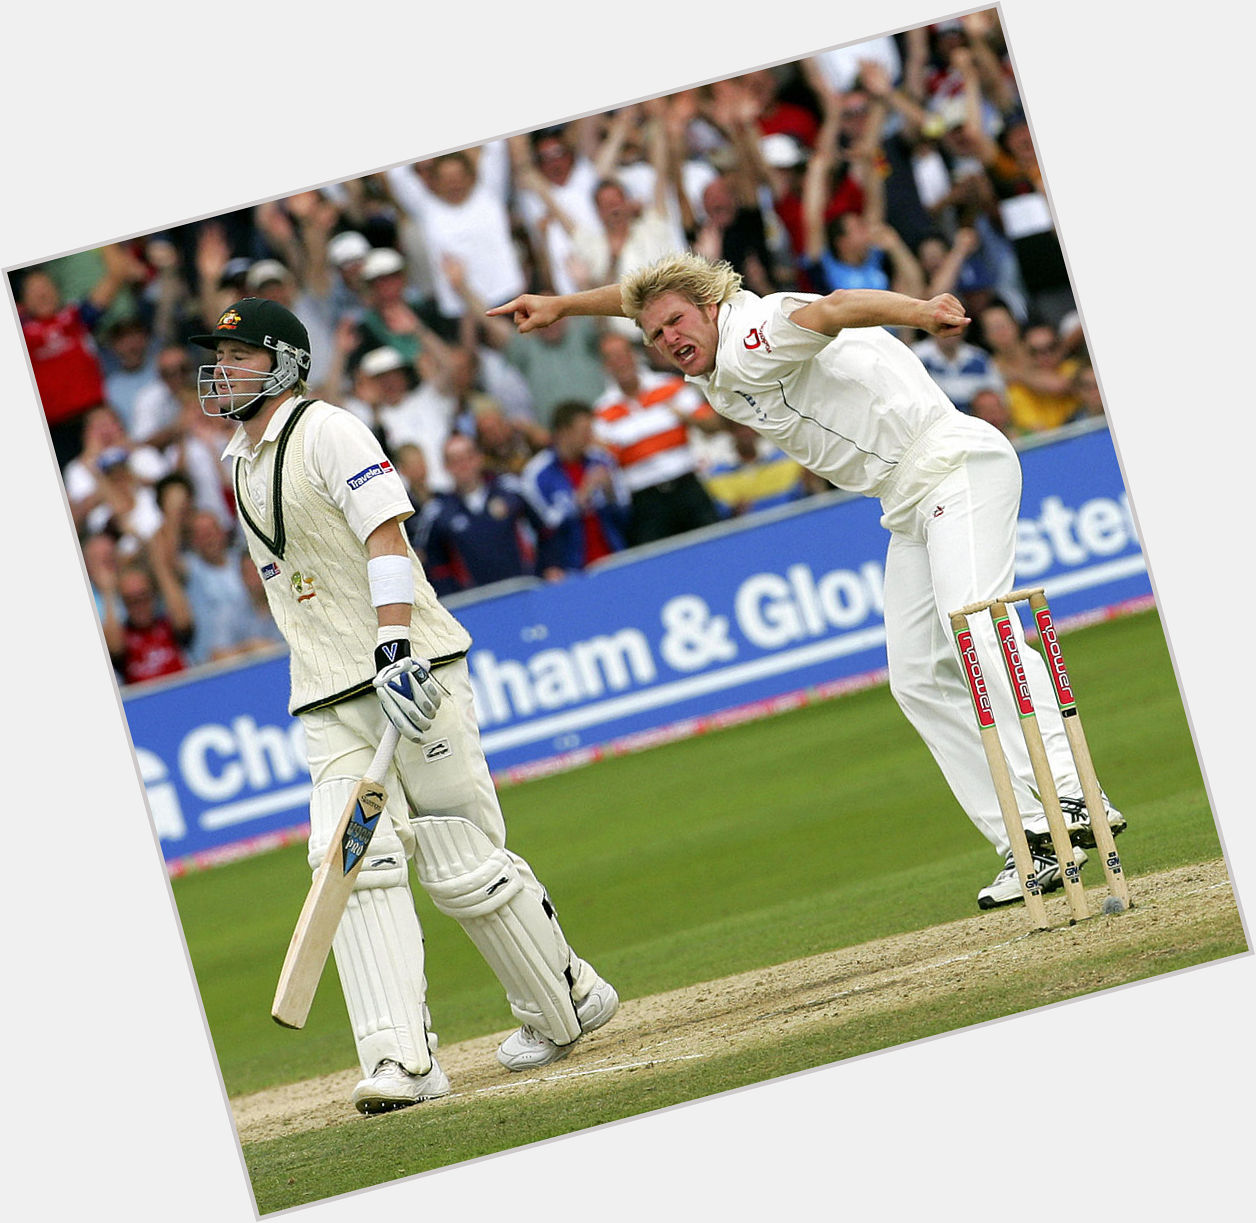 Happy birthday Matthew Hoggard!

A key member of the England bowling attack in the 2005 Ashes 